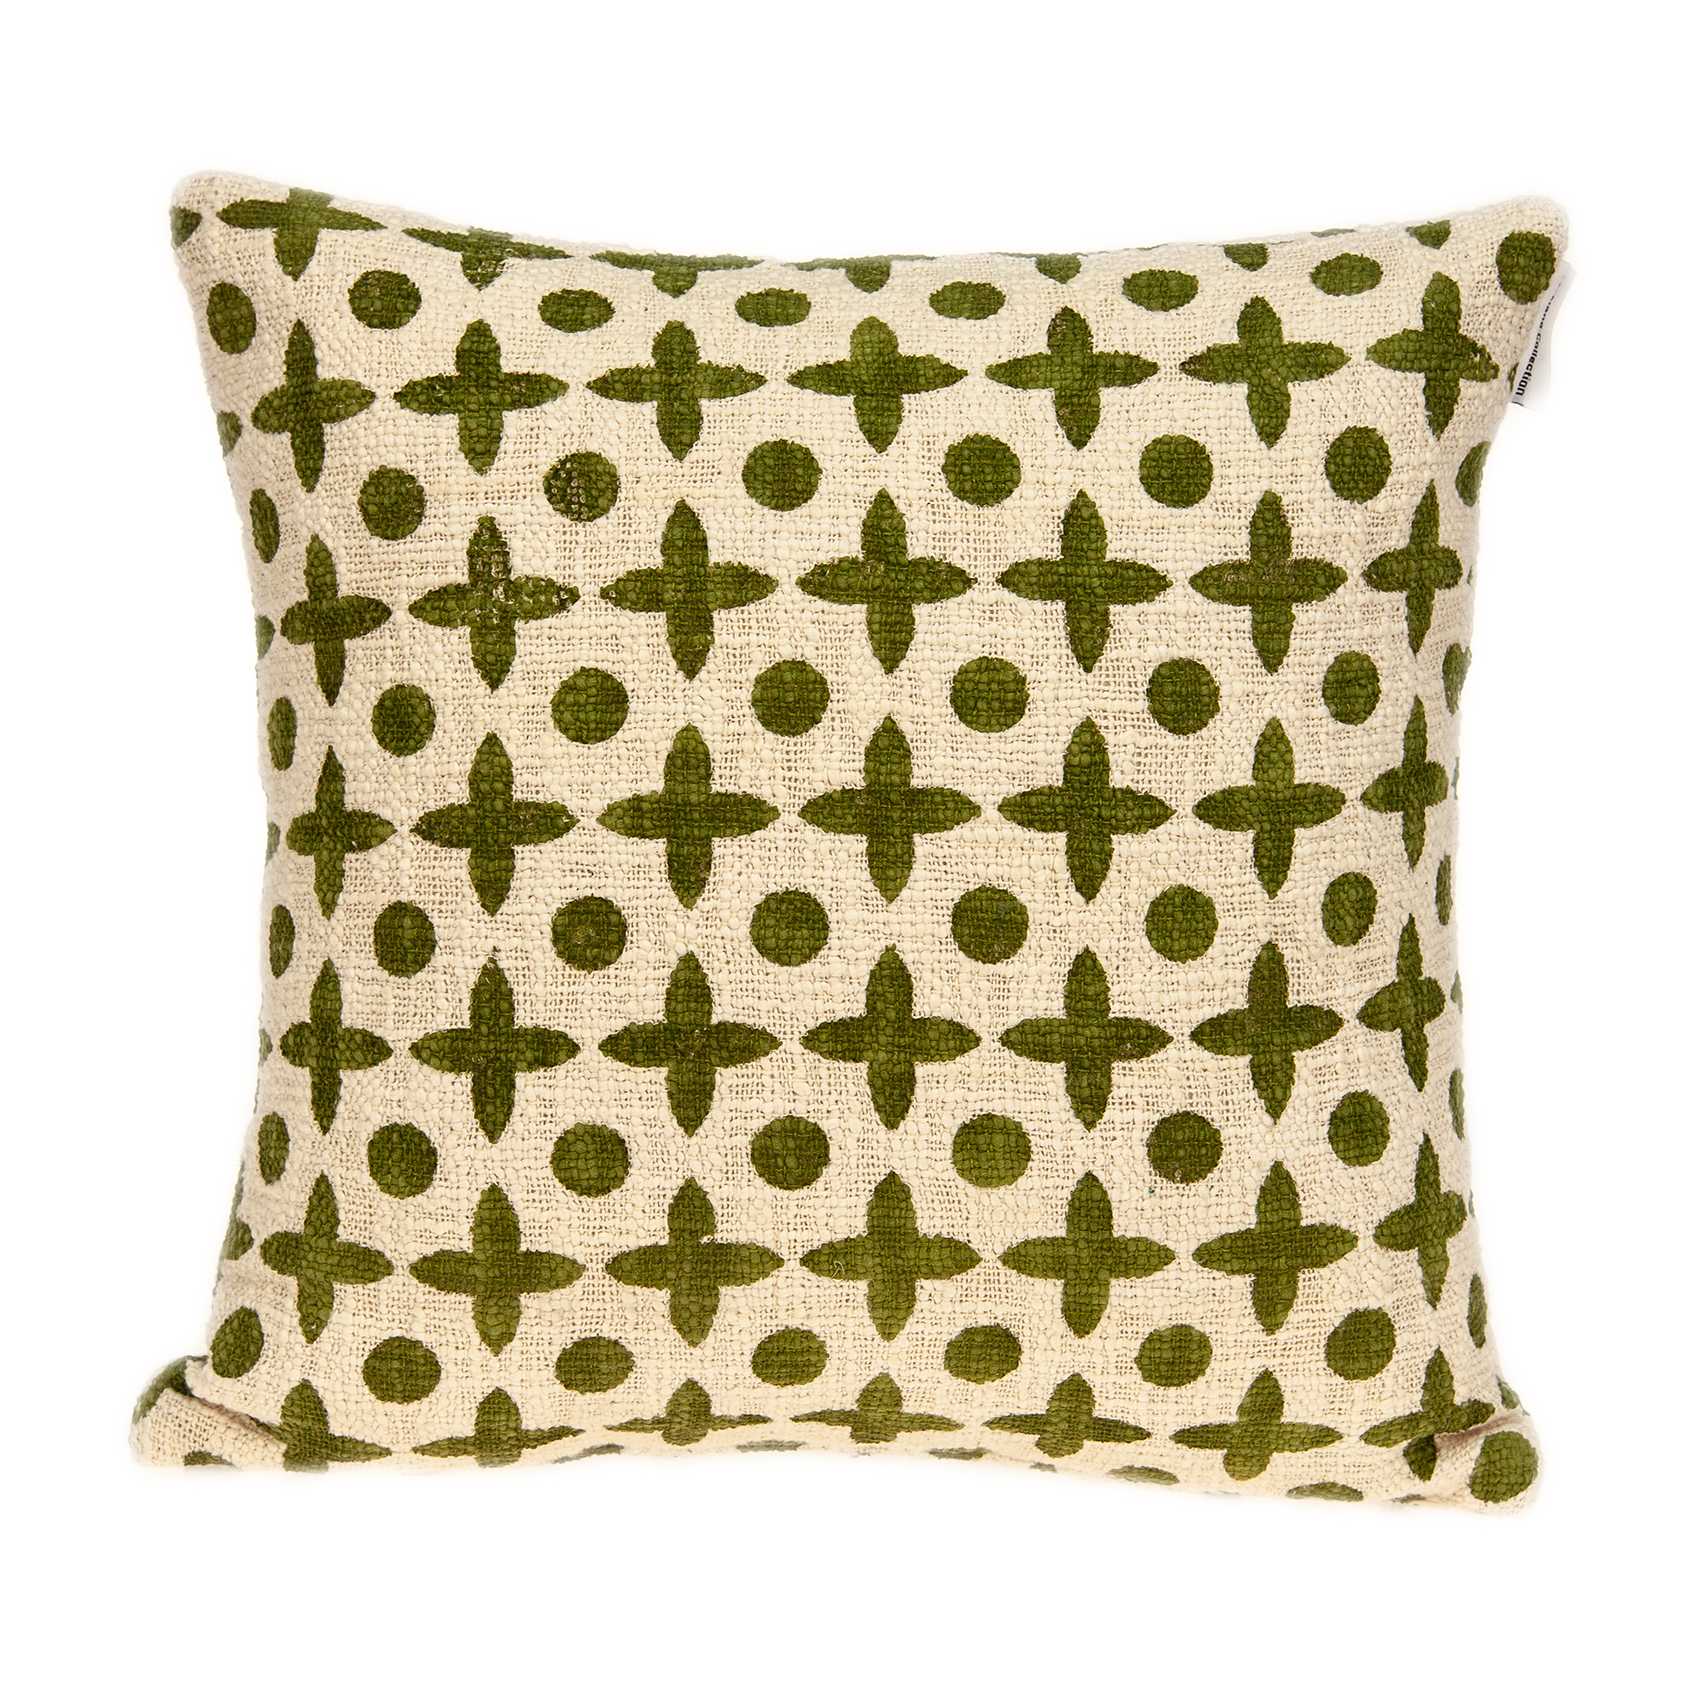 18" x 7" x 18" Transitional Beige Printed Pillow Cover With Down Insert